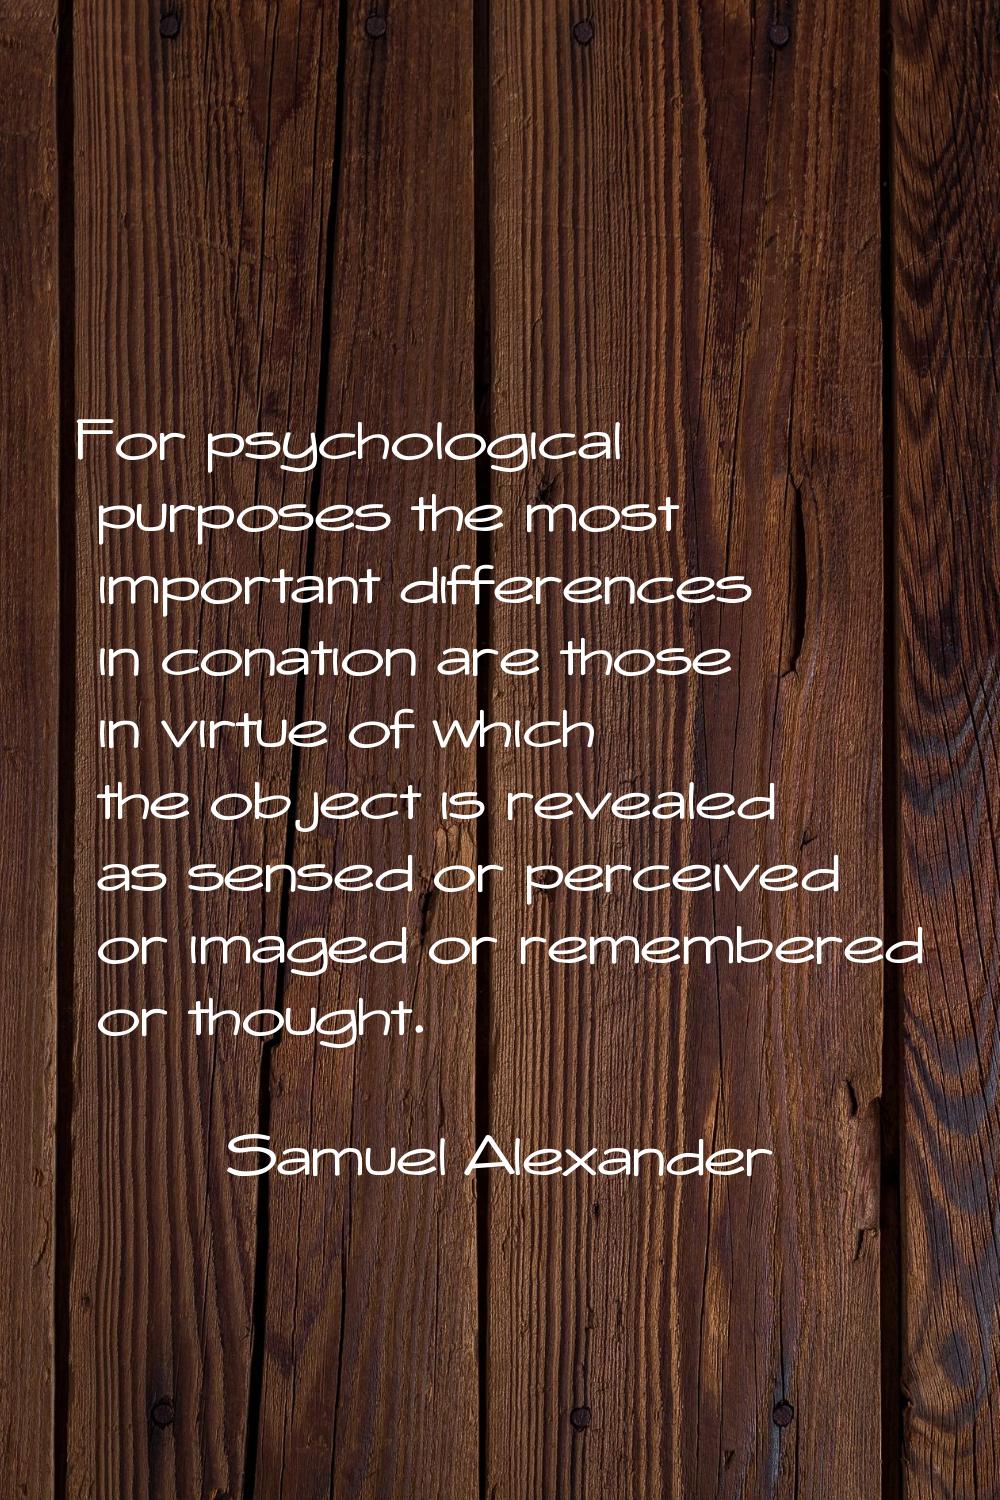 For psychological purposes the most important differences in conation are those in virtue of which 